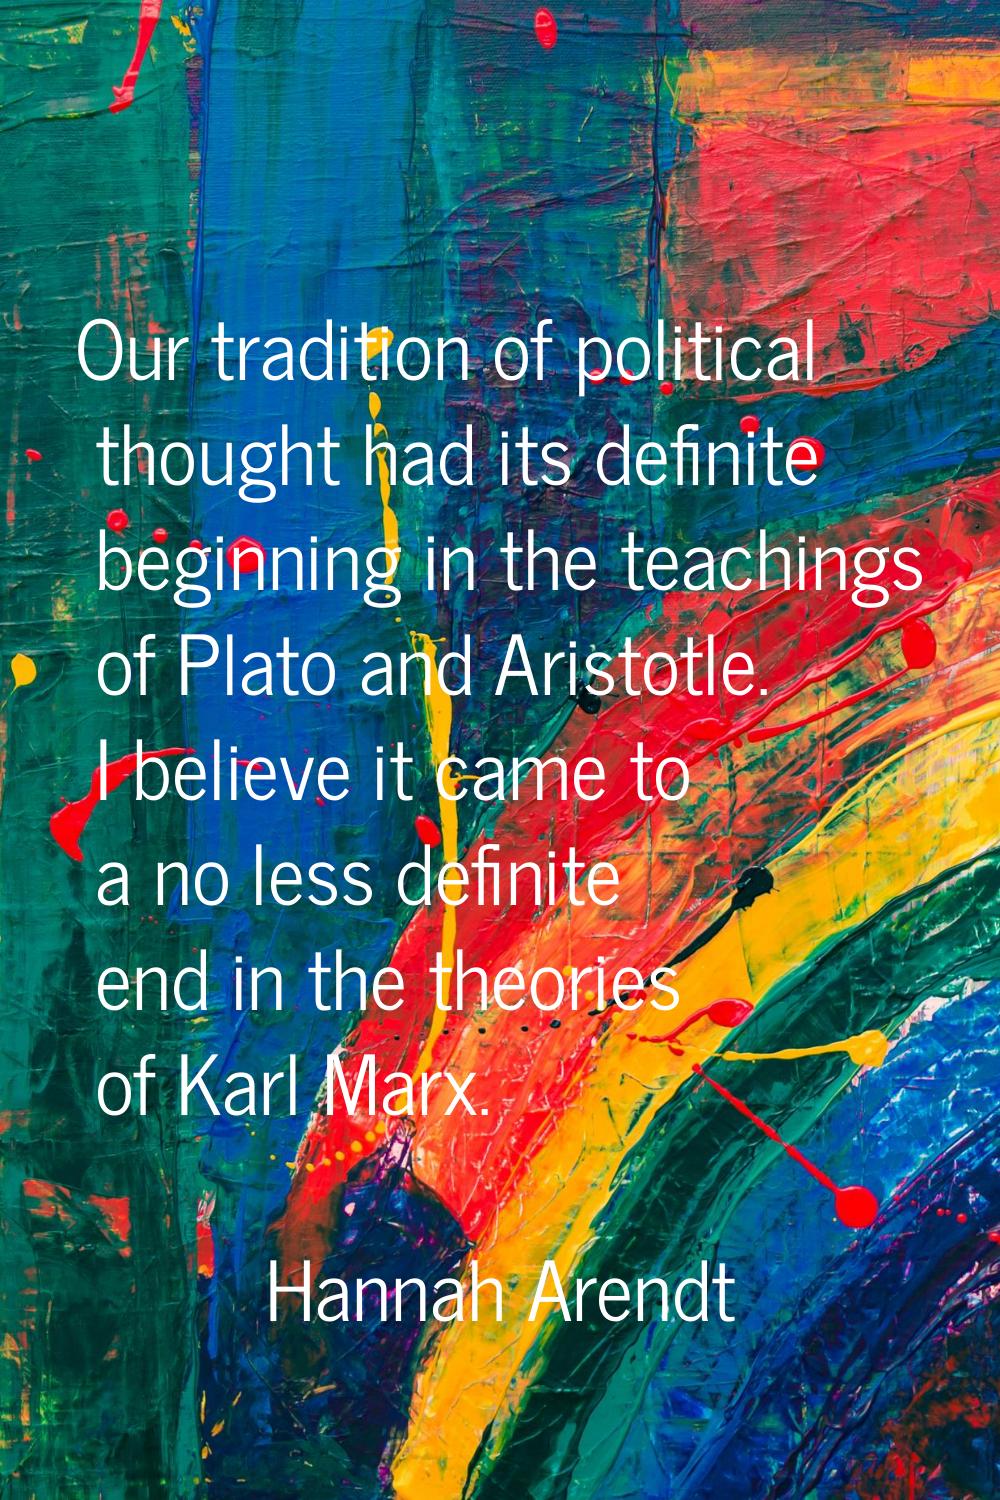 Our tradition of political thought had its definite beginning in the teachings of Plato and Aristot